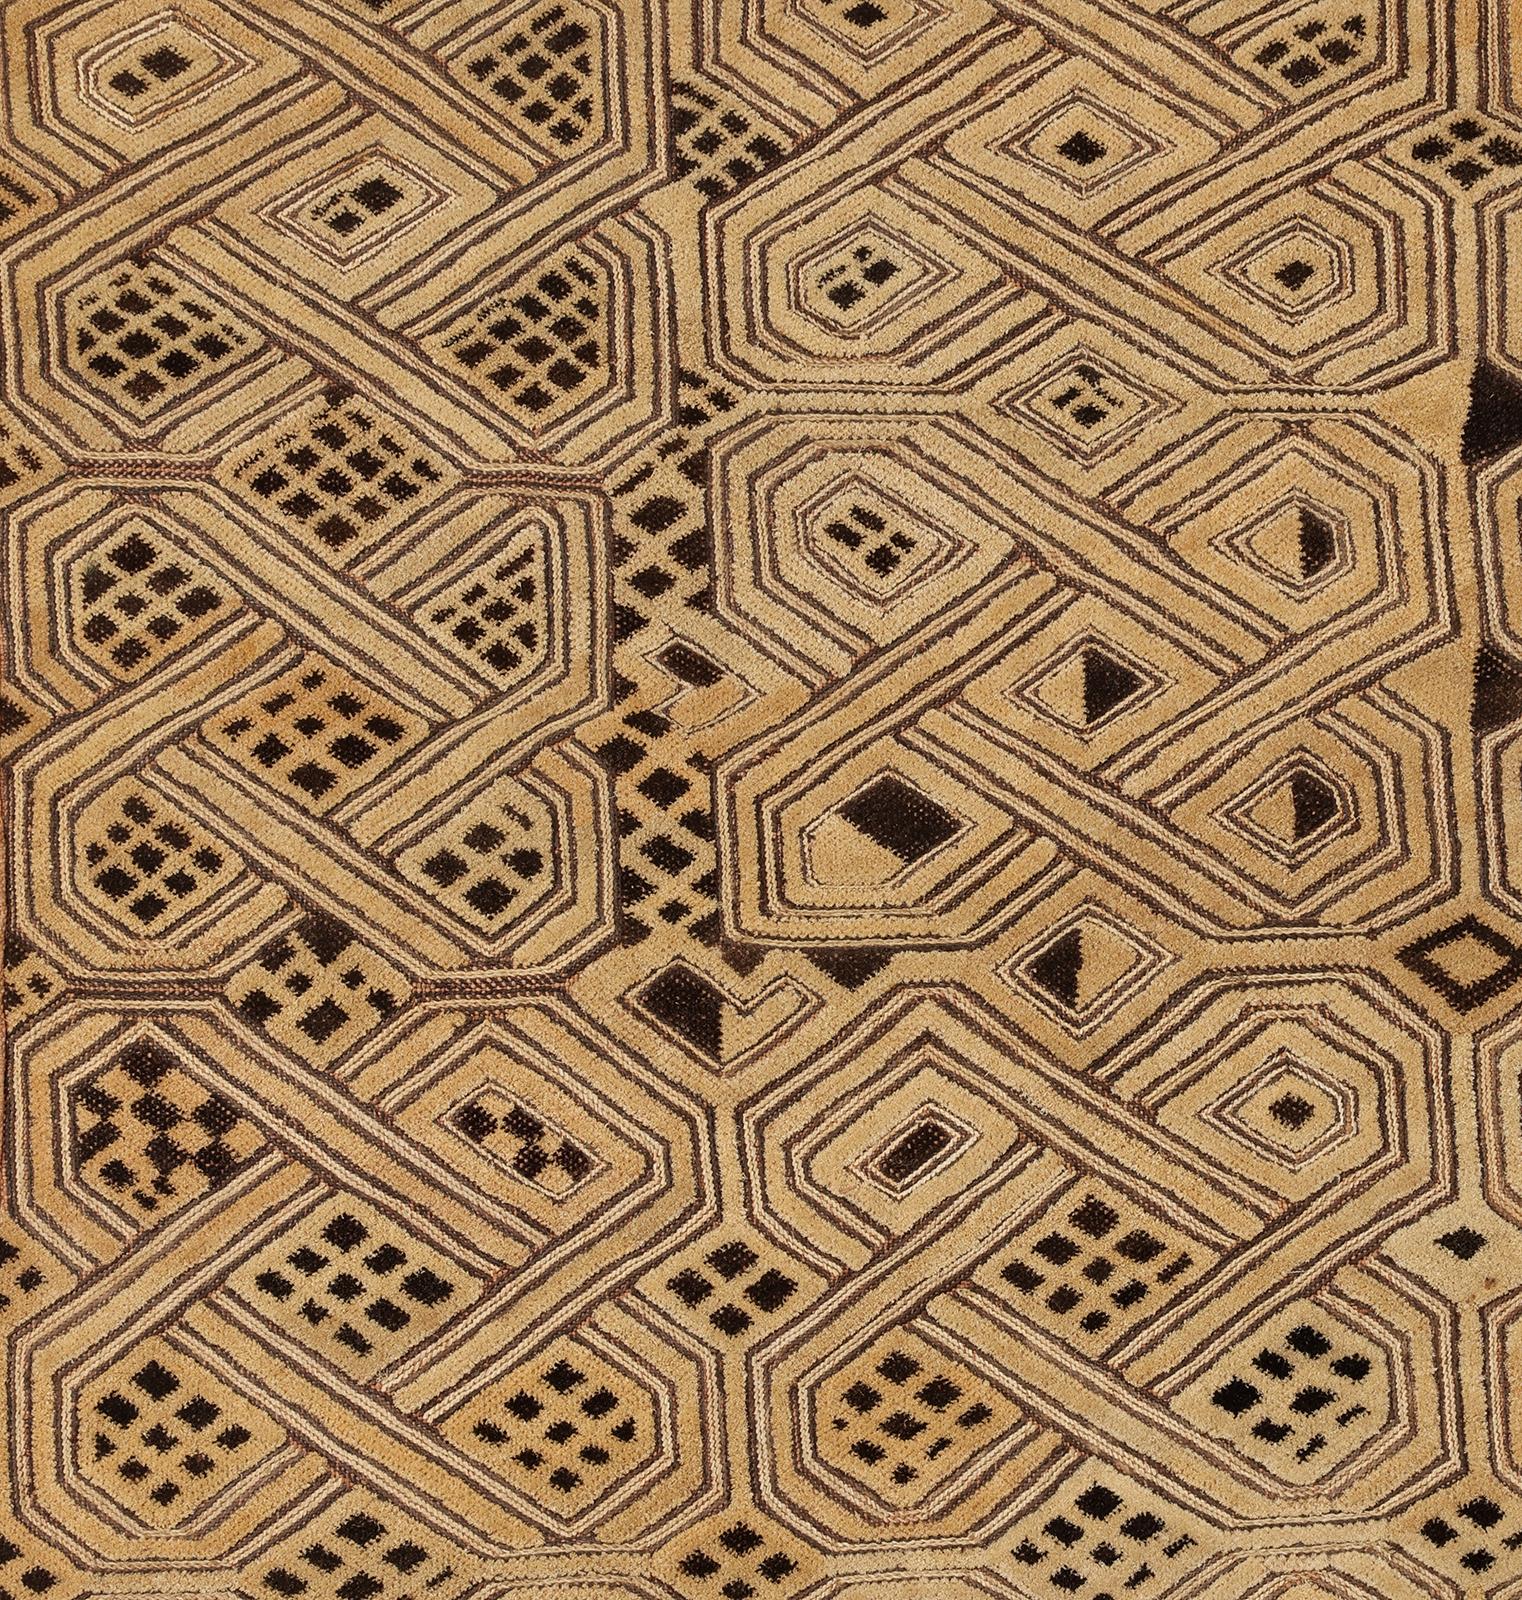 An outstanding example of an  early 20th century Kuba Prestige cloth, with variations of the endless knot motif, called Imbol by the Kuba.